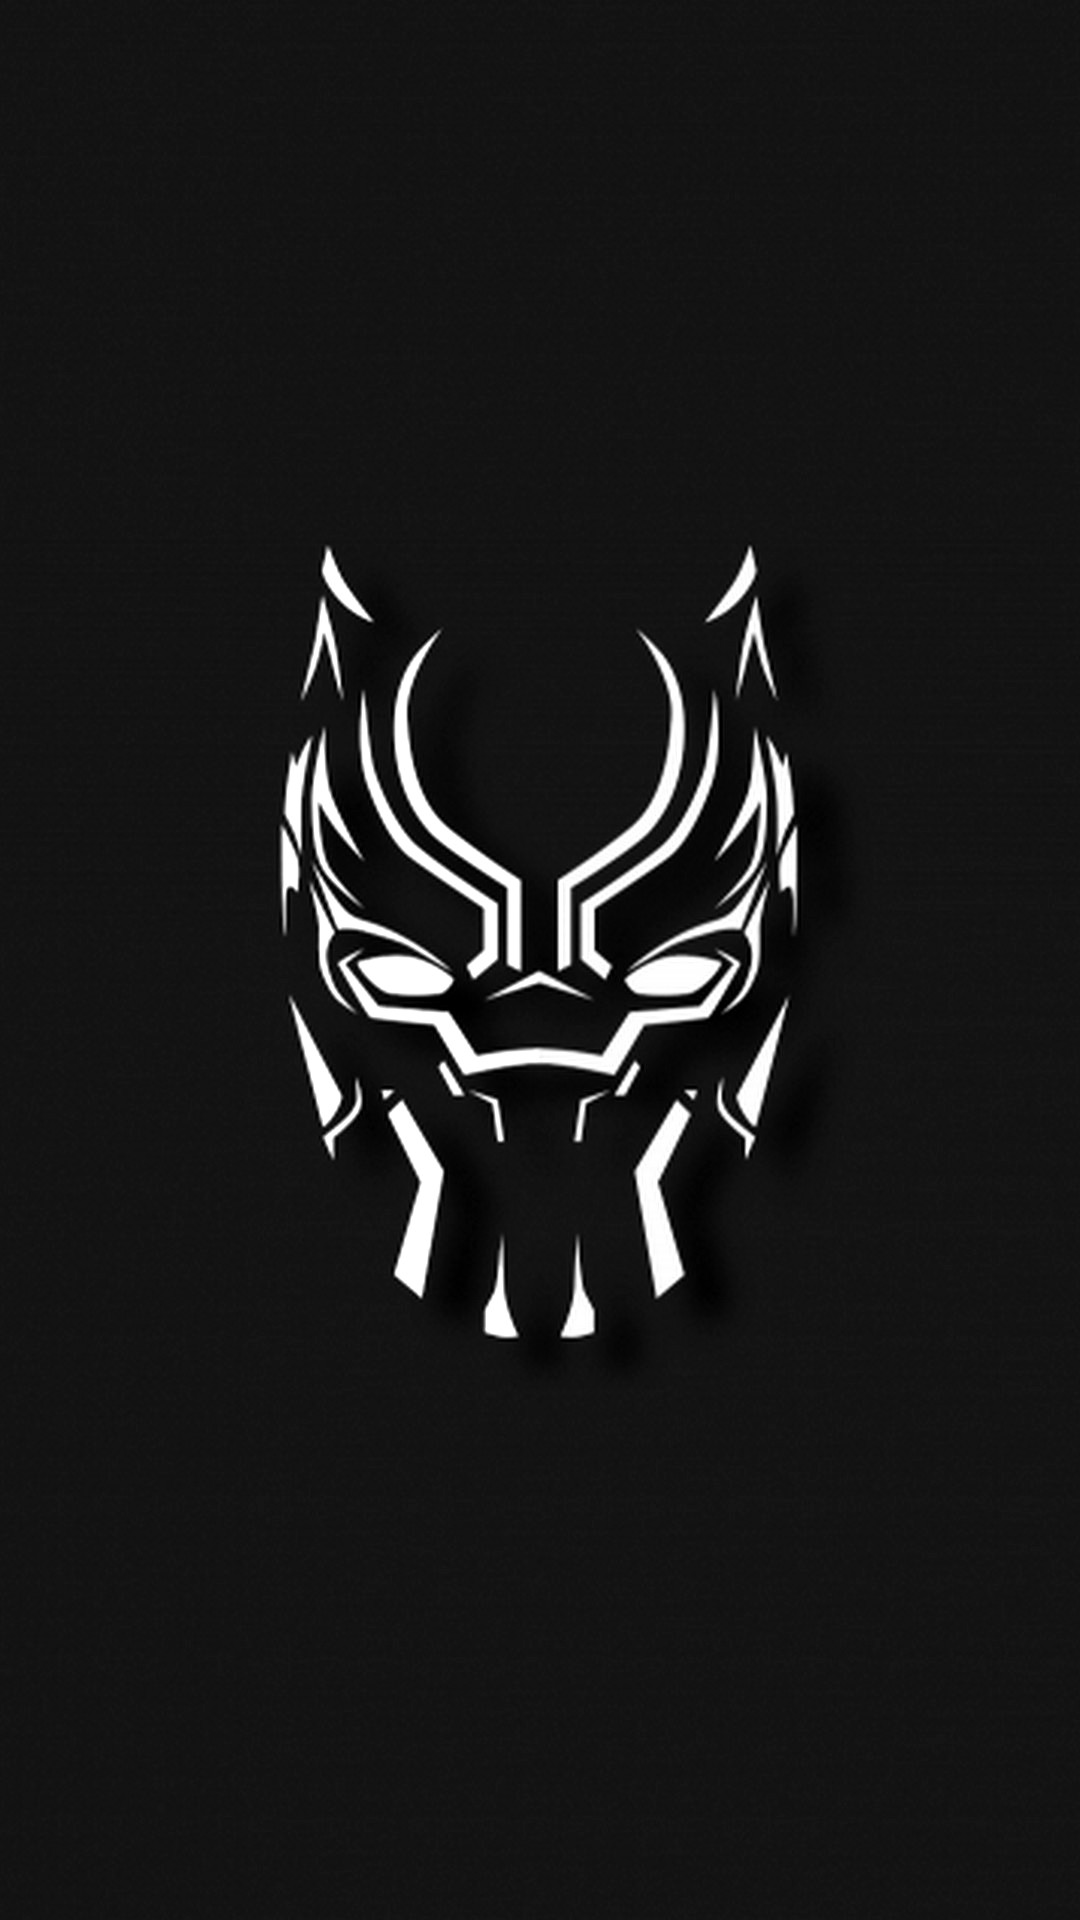 Black Panther Wallpaper Android With high-resolution 1080X1920 pixel. You can use this wallpaper for your Android backgrounds, Tablet, Samsung Screensavers, Mobile Phone Lock Screen and another Smartphones device